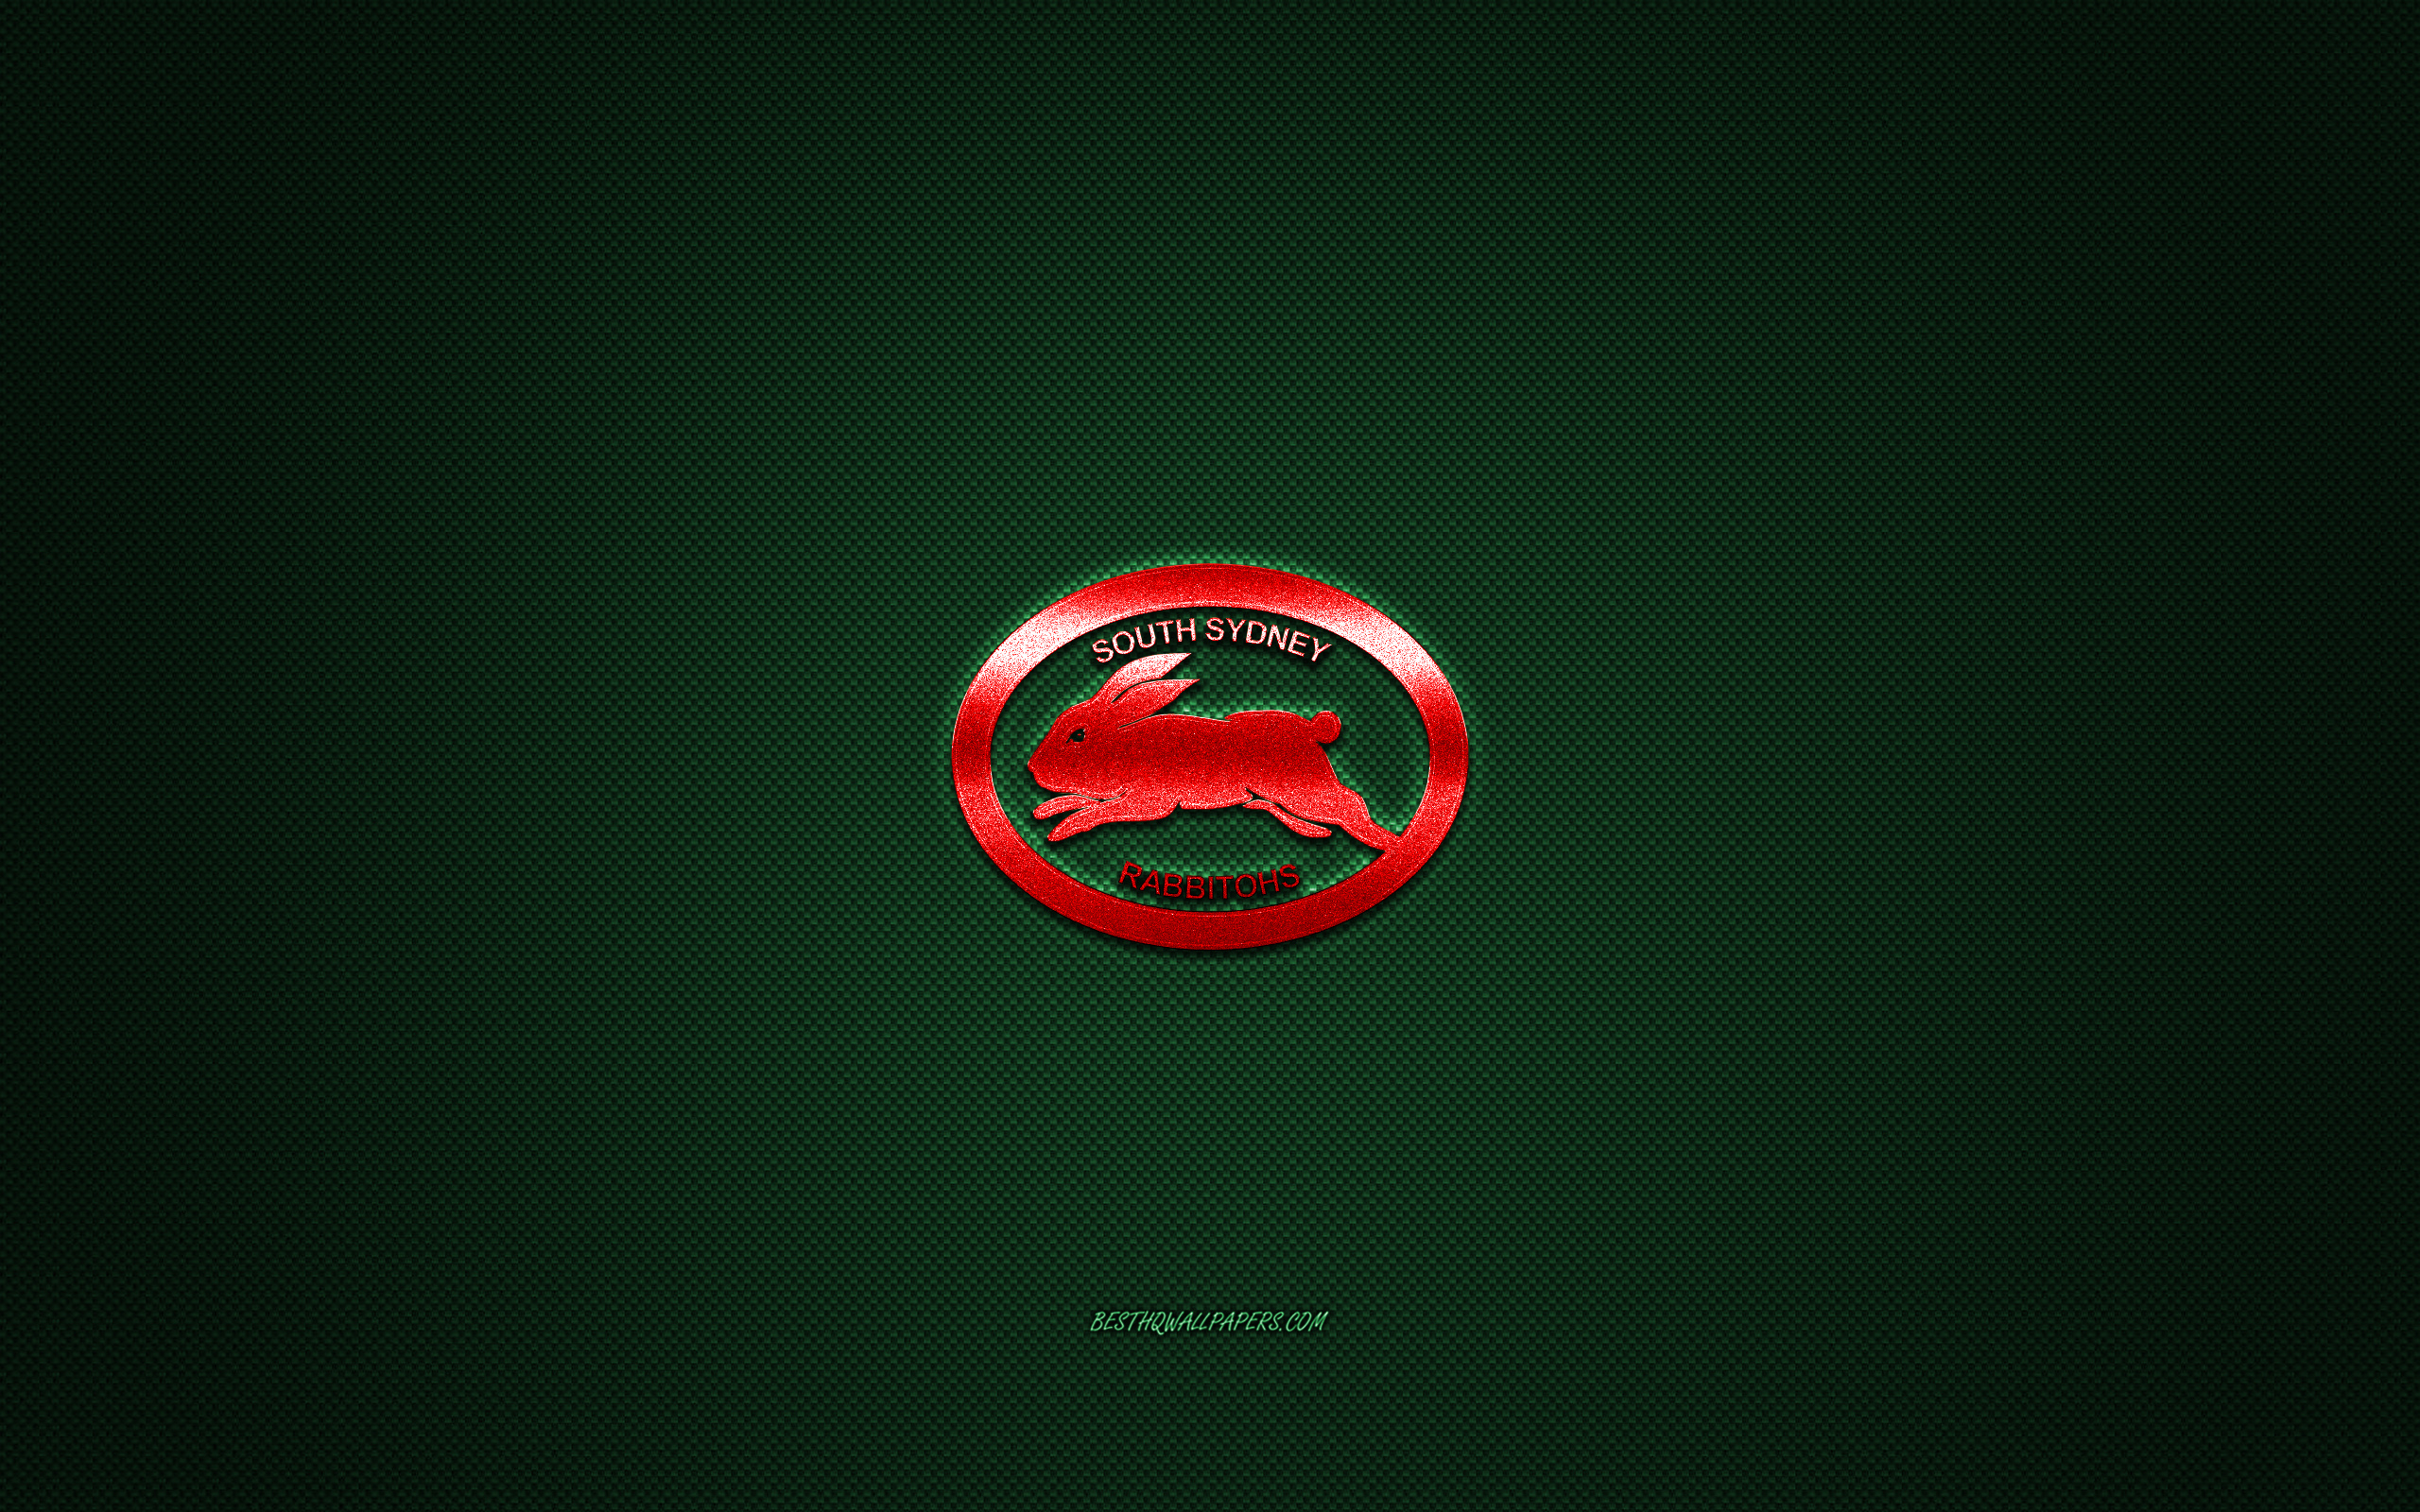 Download wallpapers South Sydney Rabbitohs Australian rugby club